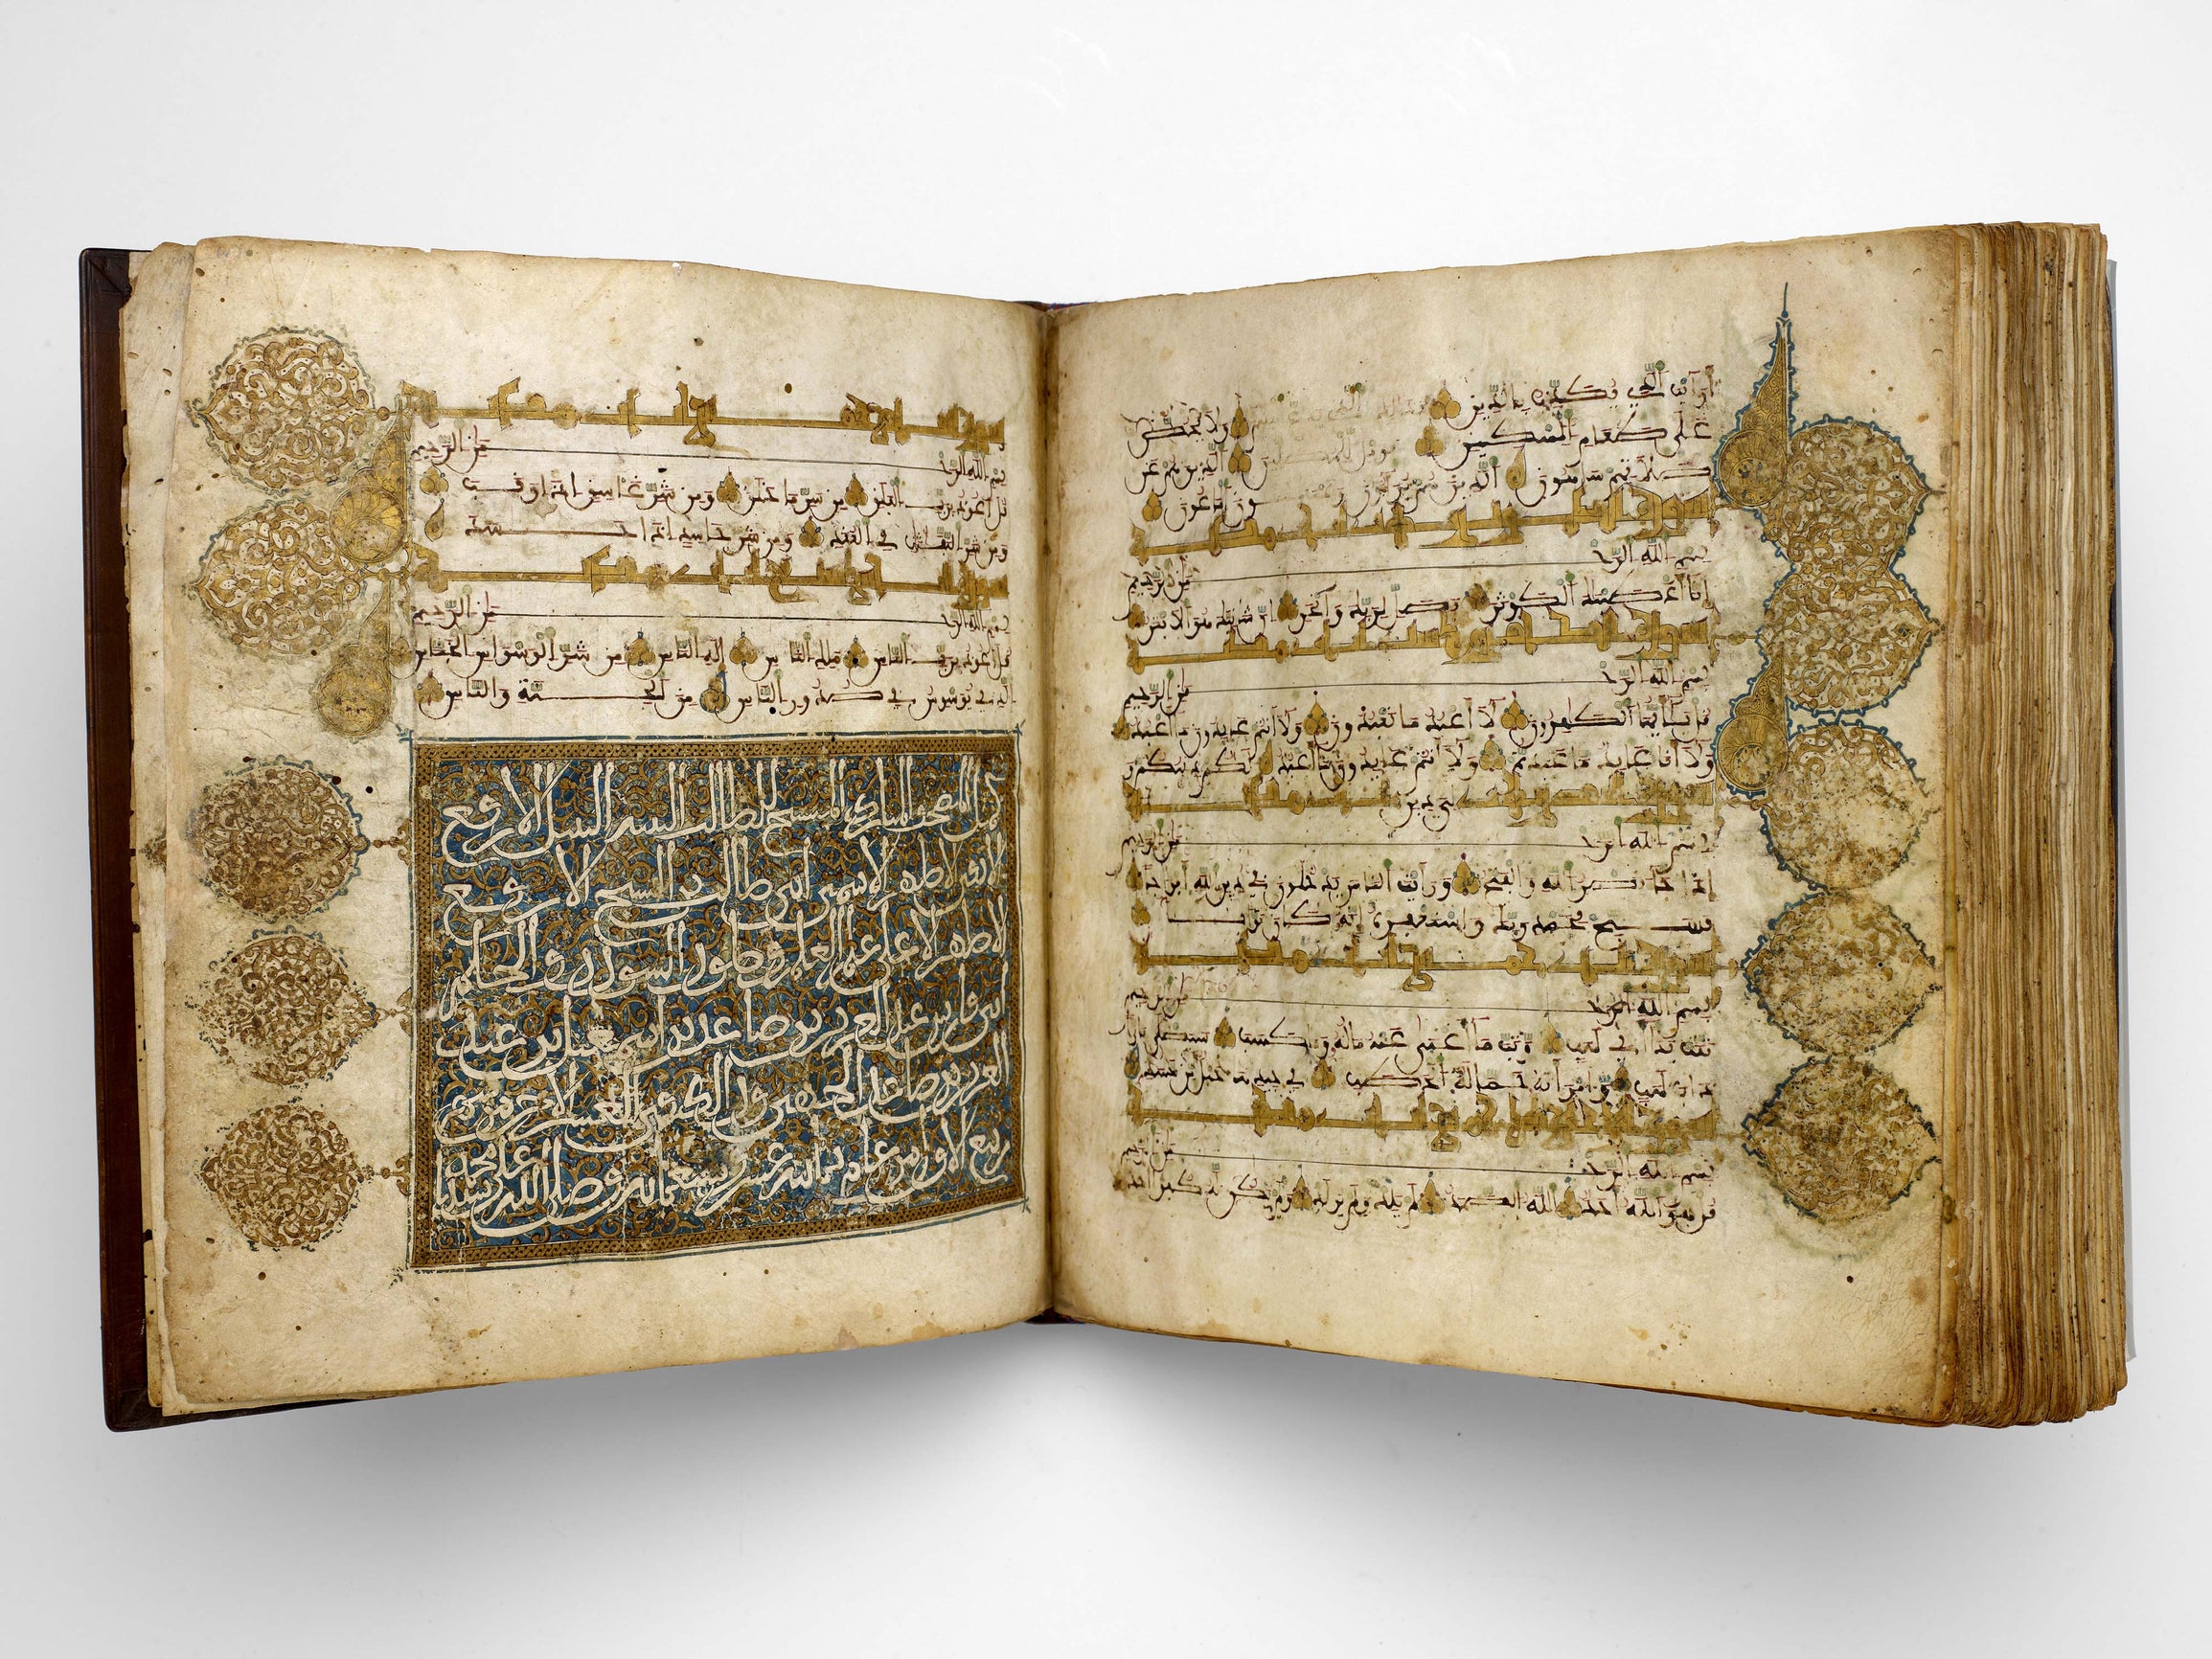 Qur’an Manuscript in Maghribi Script, Morocco, end of Rabi’ al-Awwal, AH 718 / 1318, ink, opaque watercolor, and gold on parchment, museum purchase funded by the Honorable and Mrs. Hushang Ansary, the Brown Foundation Accessions Endowment Fund, and the Alice Pratt Brown Museum Fund, 2007.1303, Museum of Fine Arts, Houston